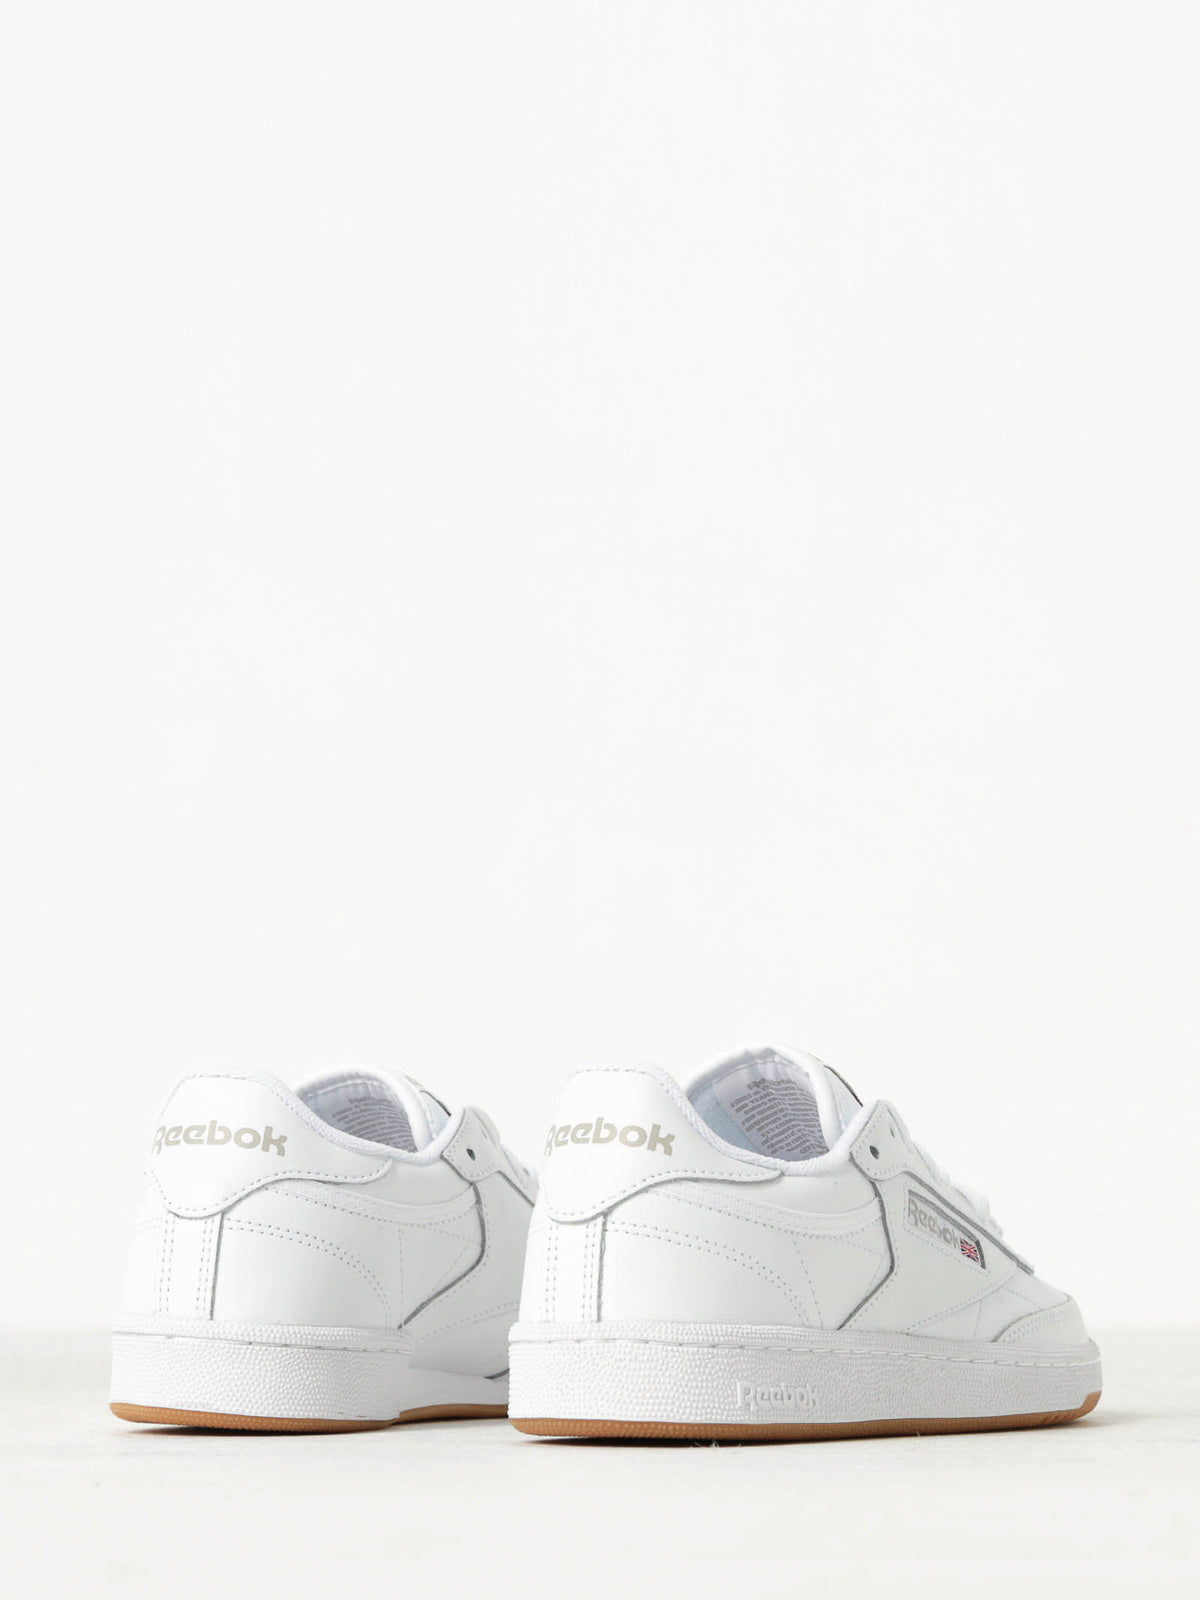 Womens Club C 85 Sneakers in White Leather